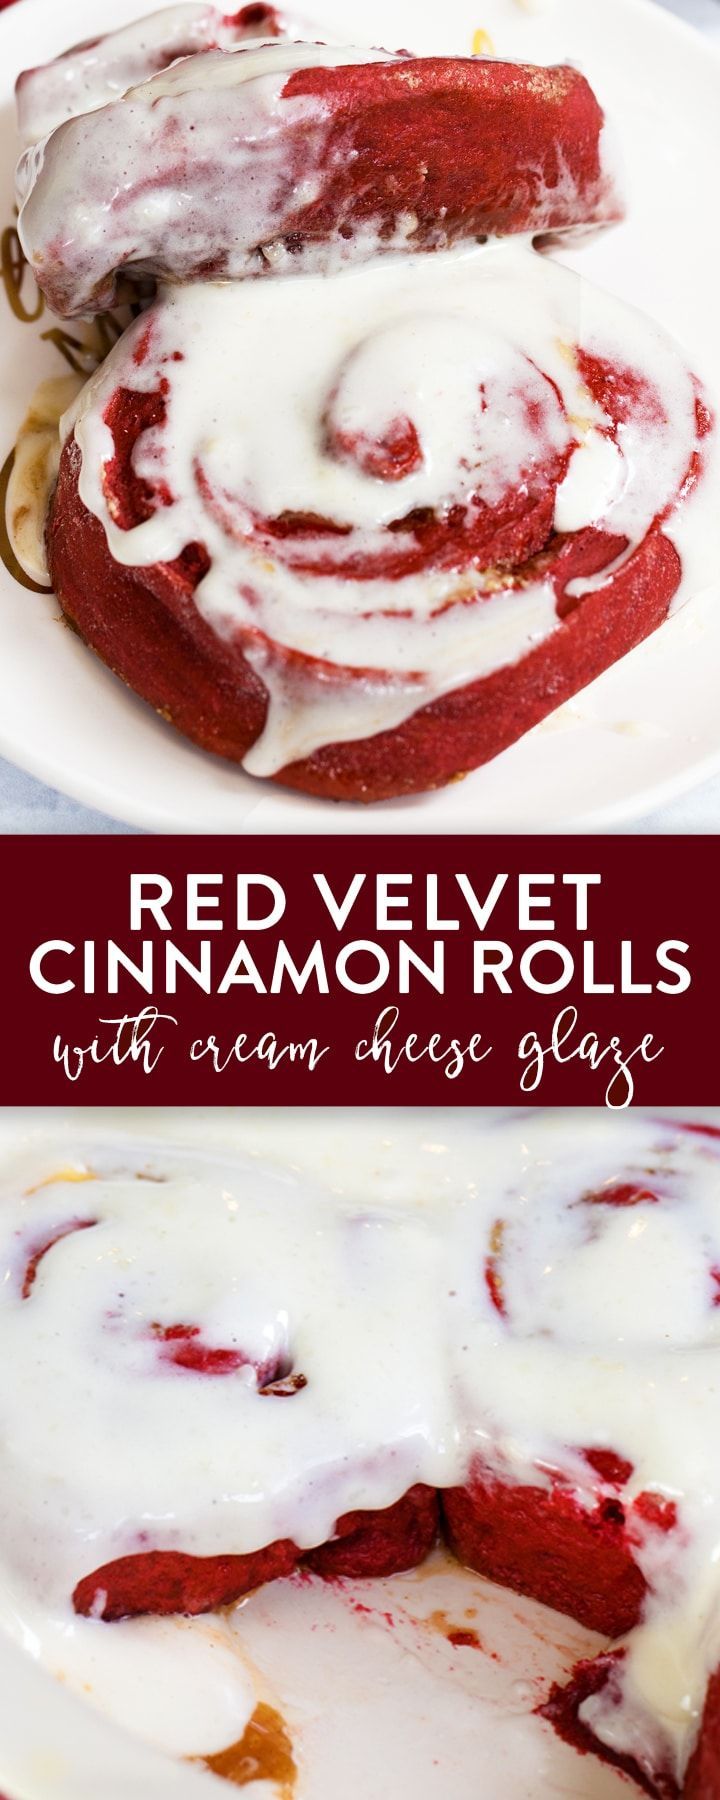 Red Velvet Cinnamon Rolls with Cream Cheese Glaze | The Bewitchin' Kitchen -   19 holiday Desserts with cream cheese ideas